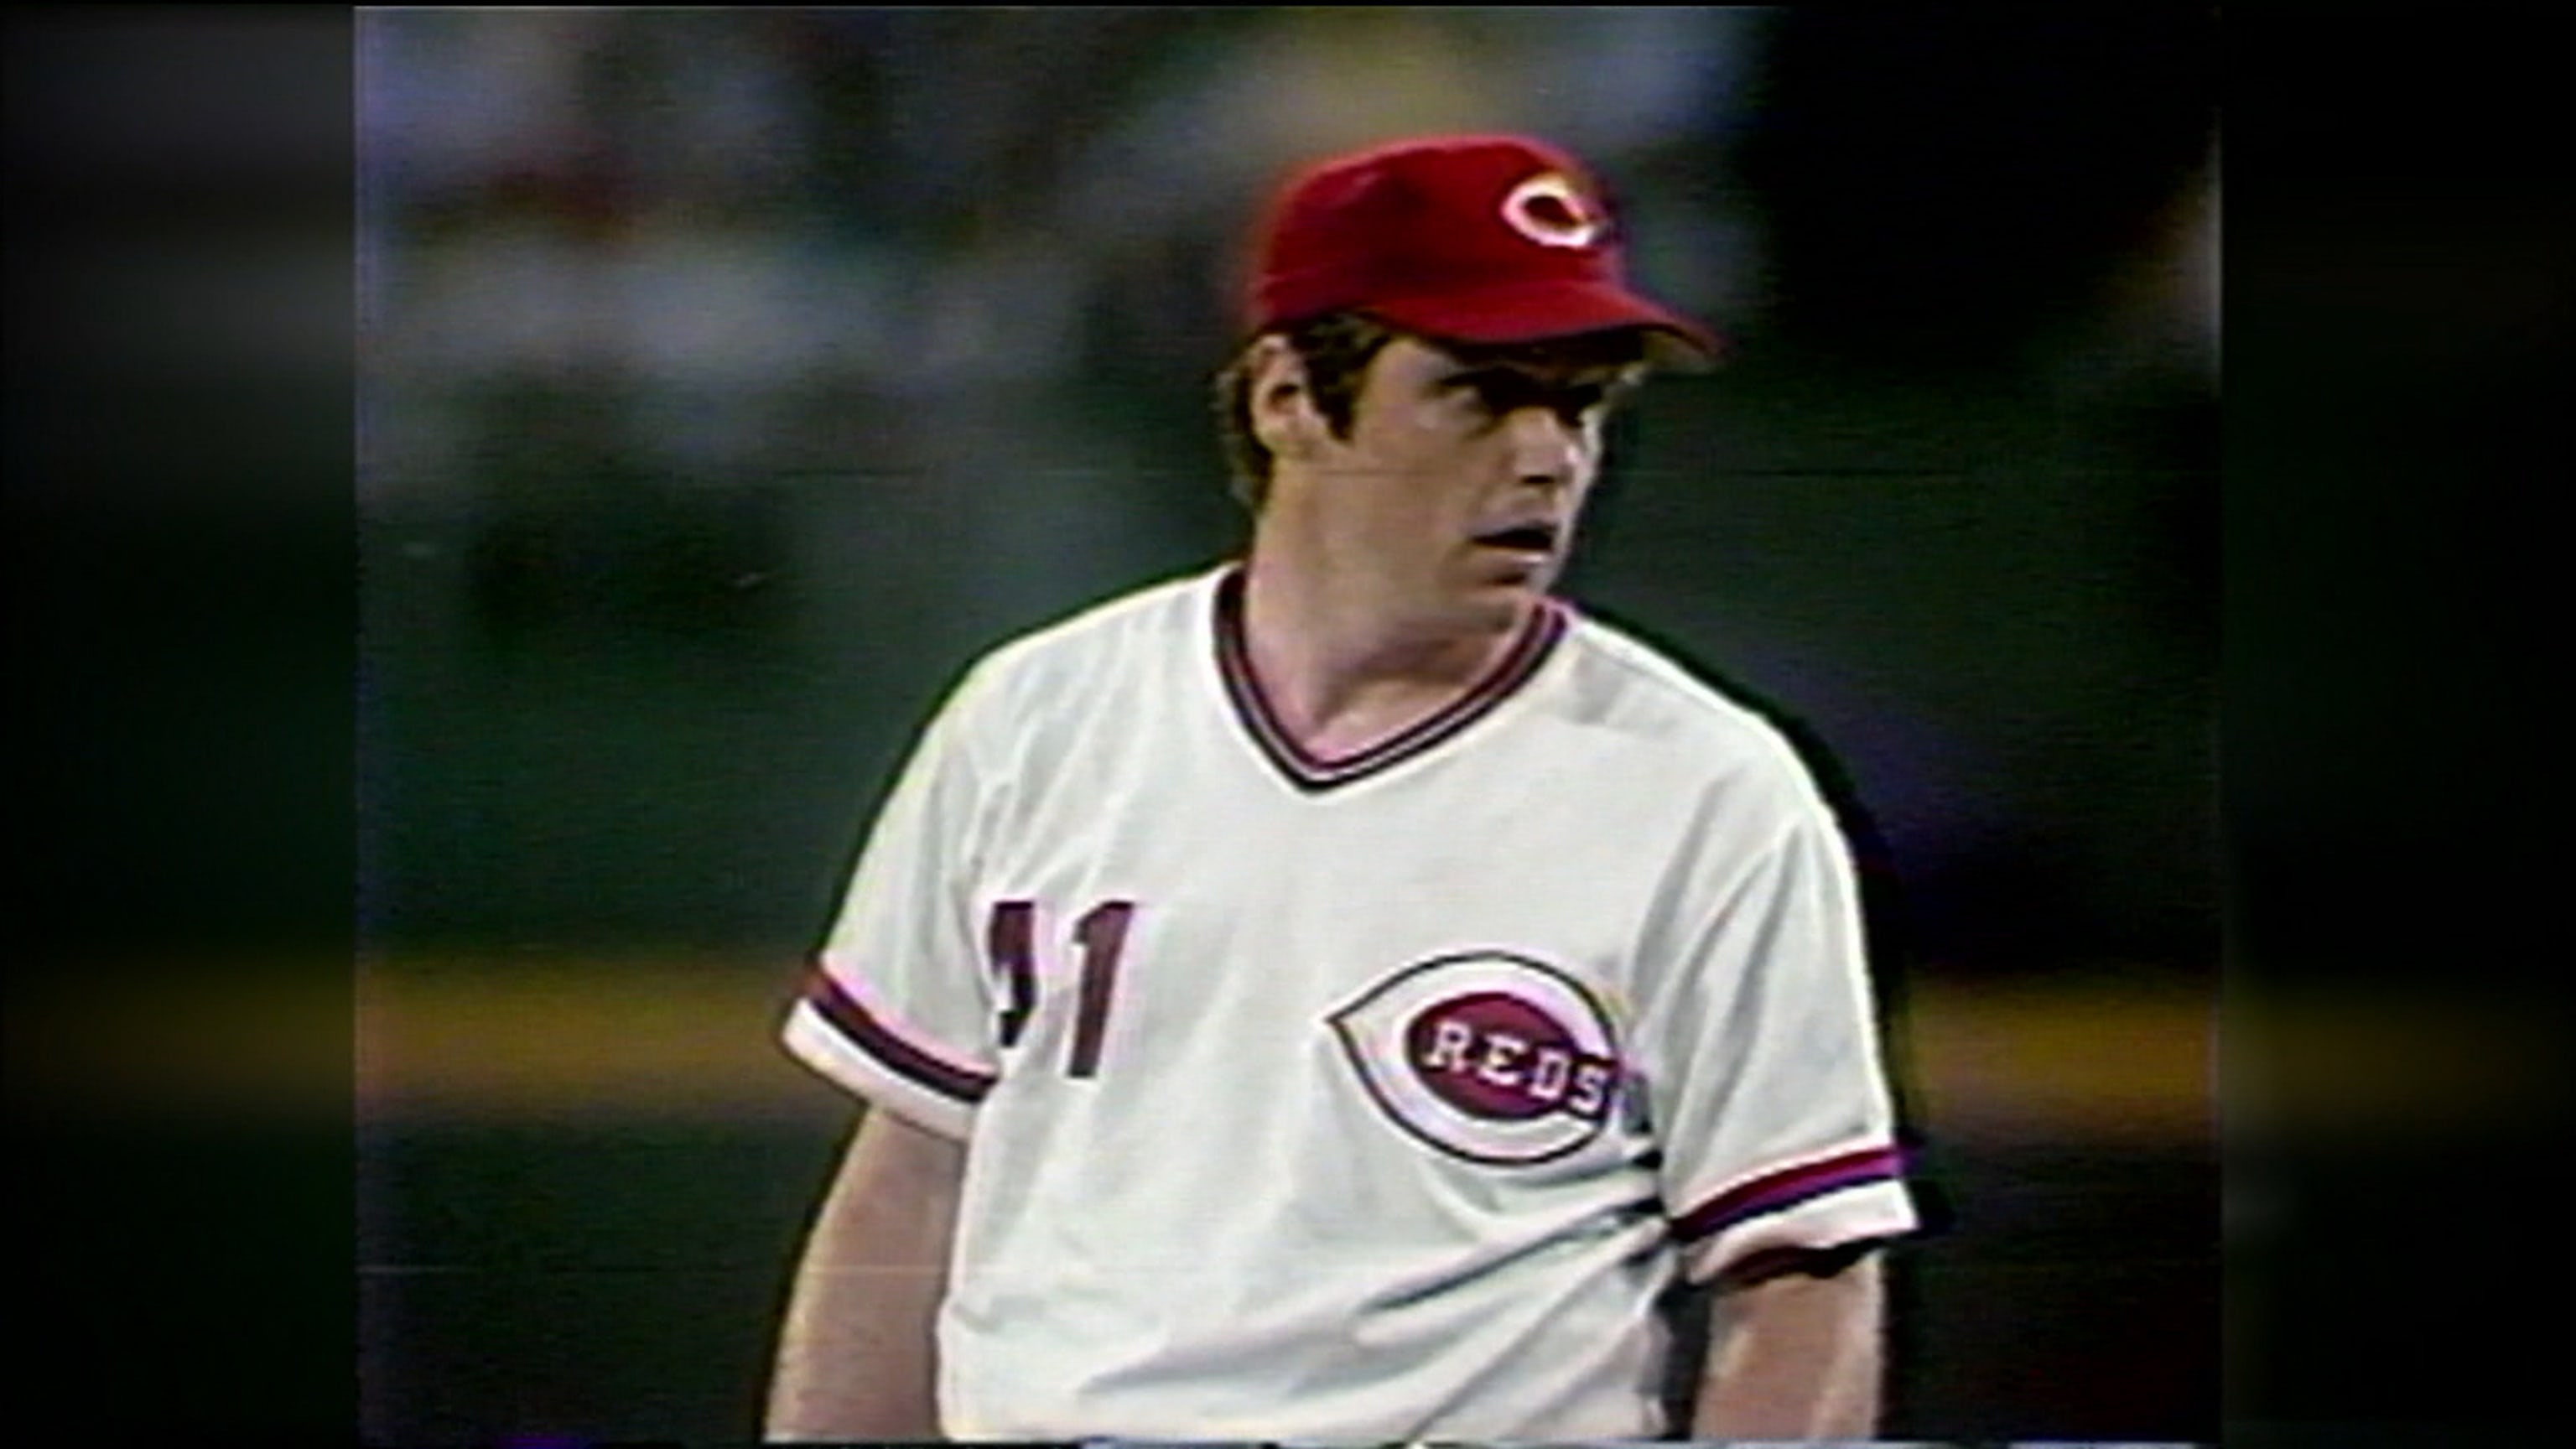 Cincinnati Reds on X: January 7, 1992: Tom Seaver is elected to the  @baseballhall after being selected on 98.8% of ballots in his first year of  eligibility. Tom Terrific was a two-time